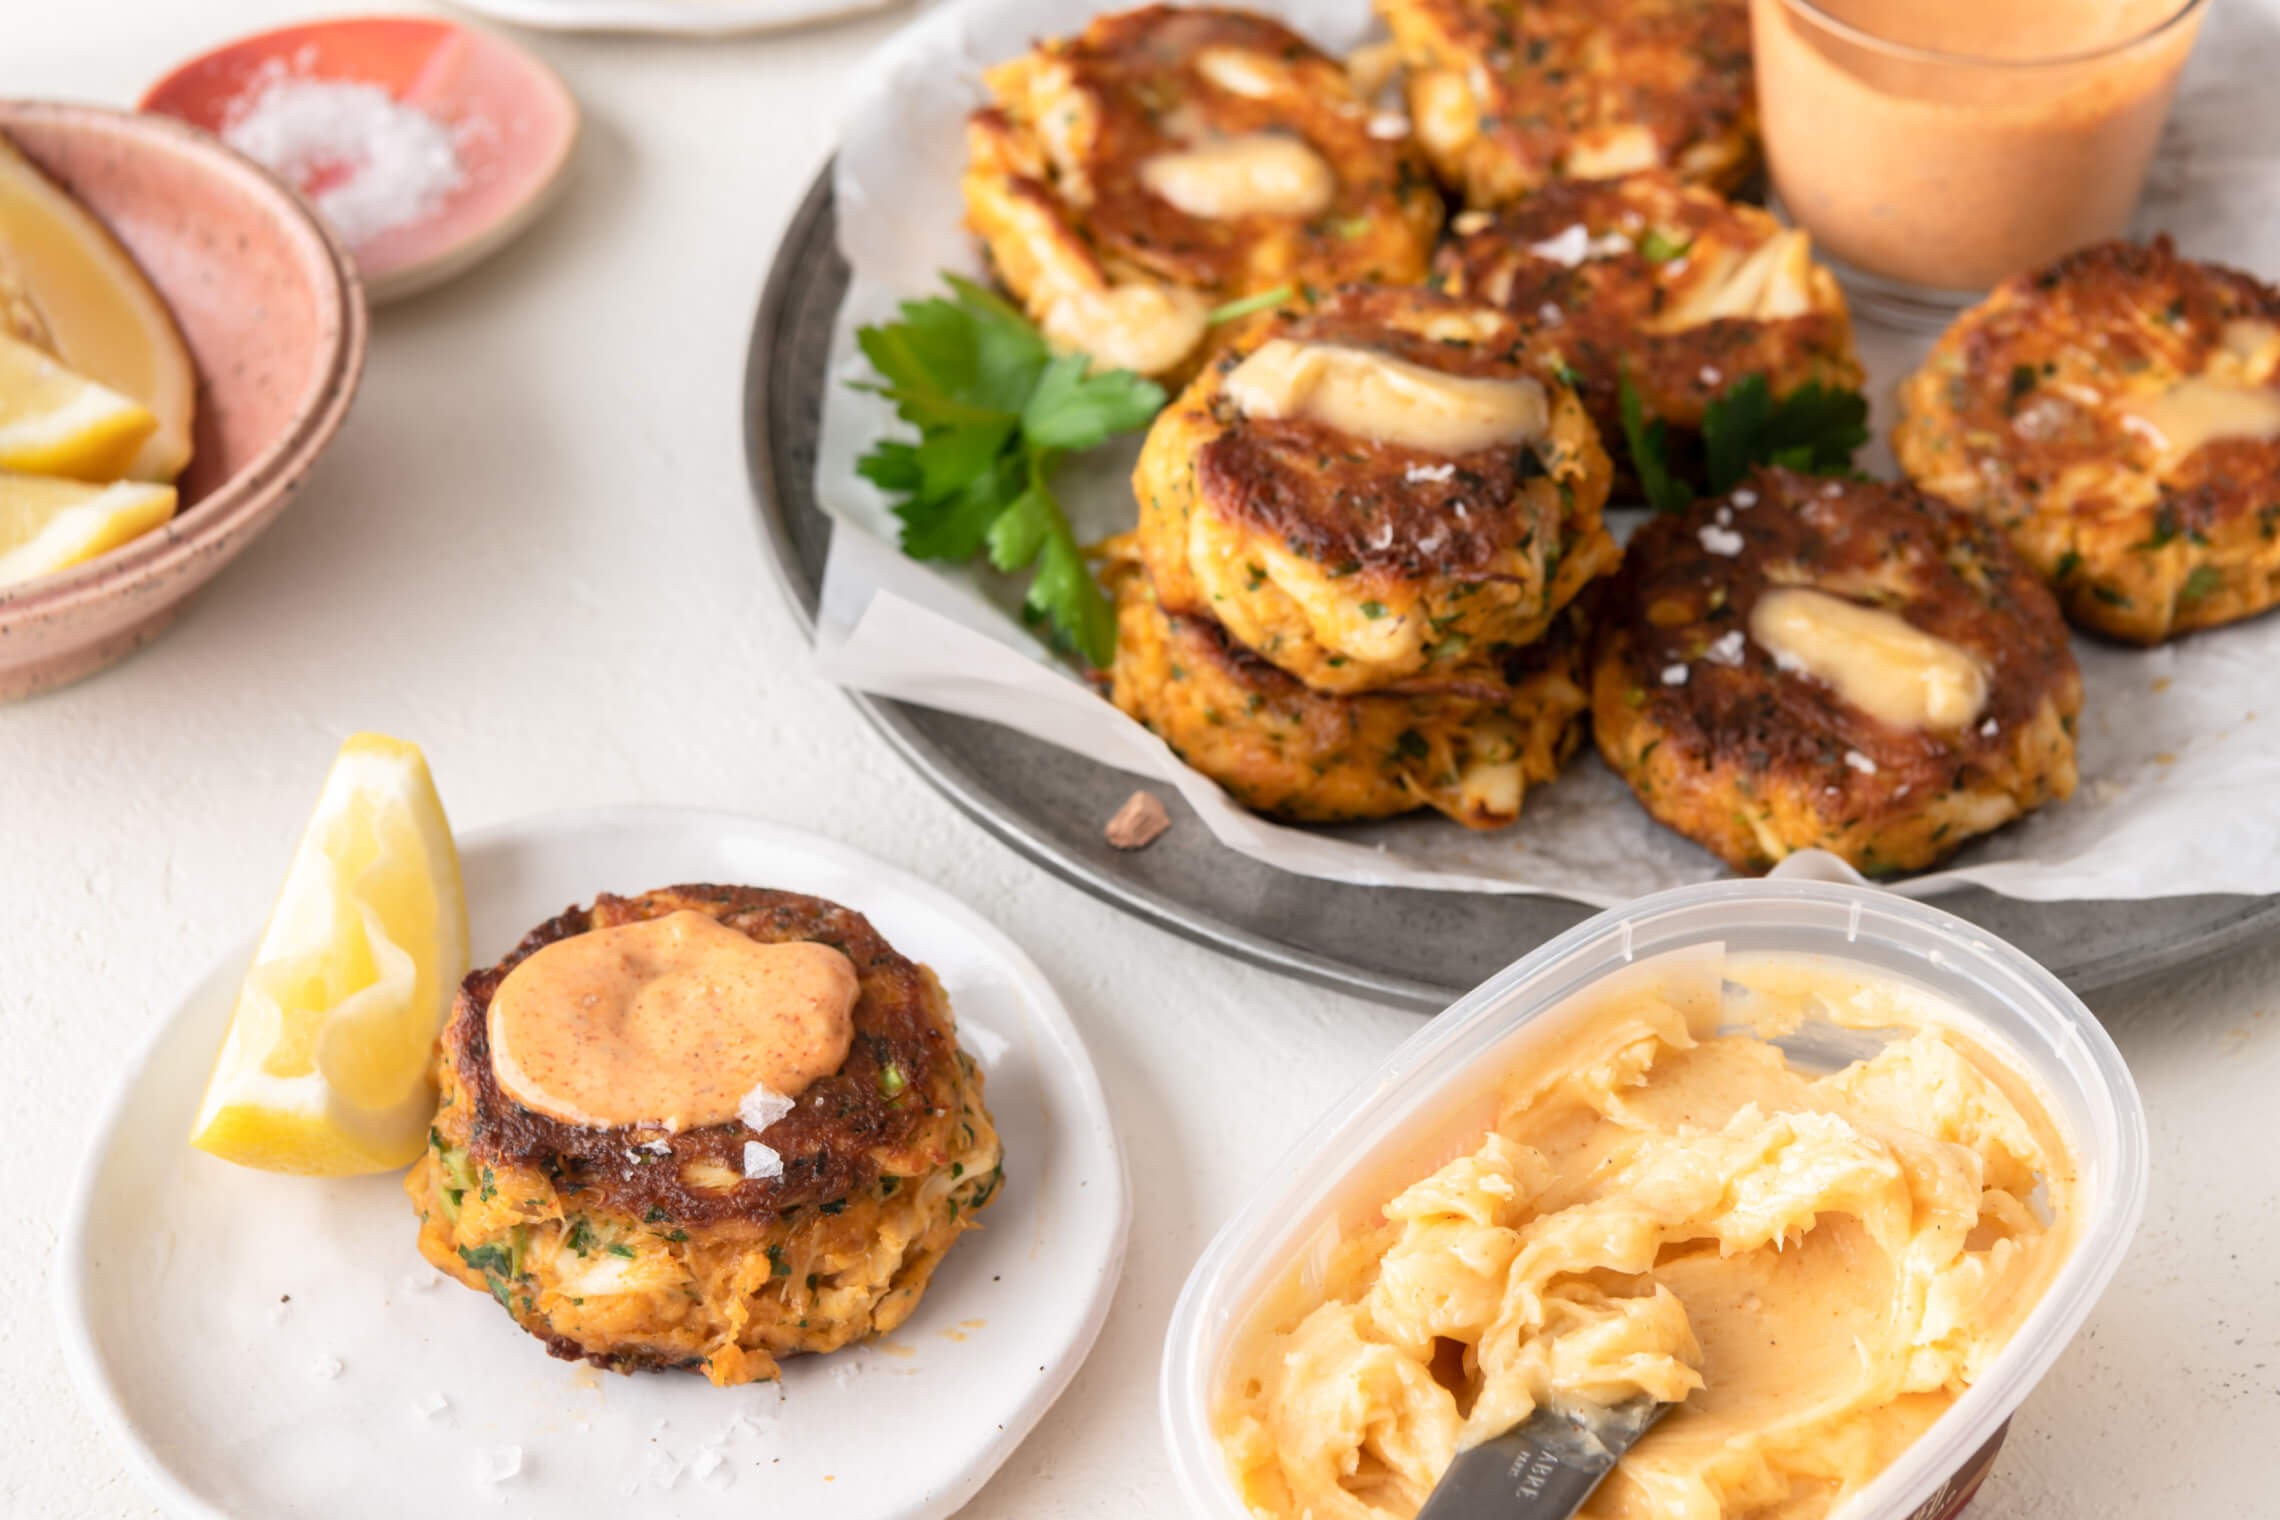 Smoked Crab Cakes with Spicy Remoulade